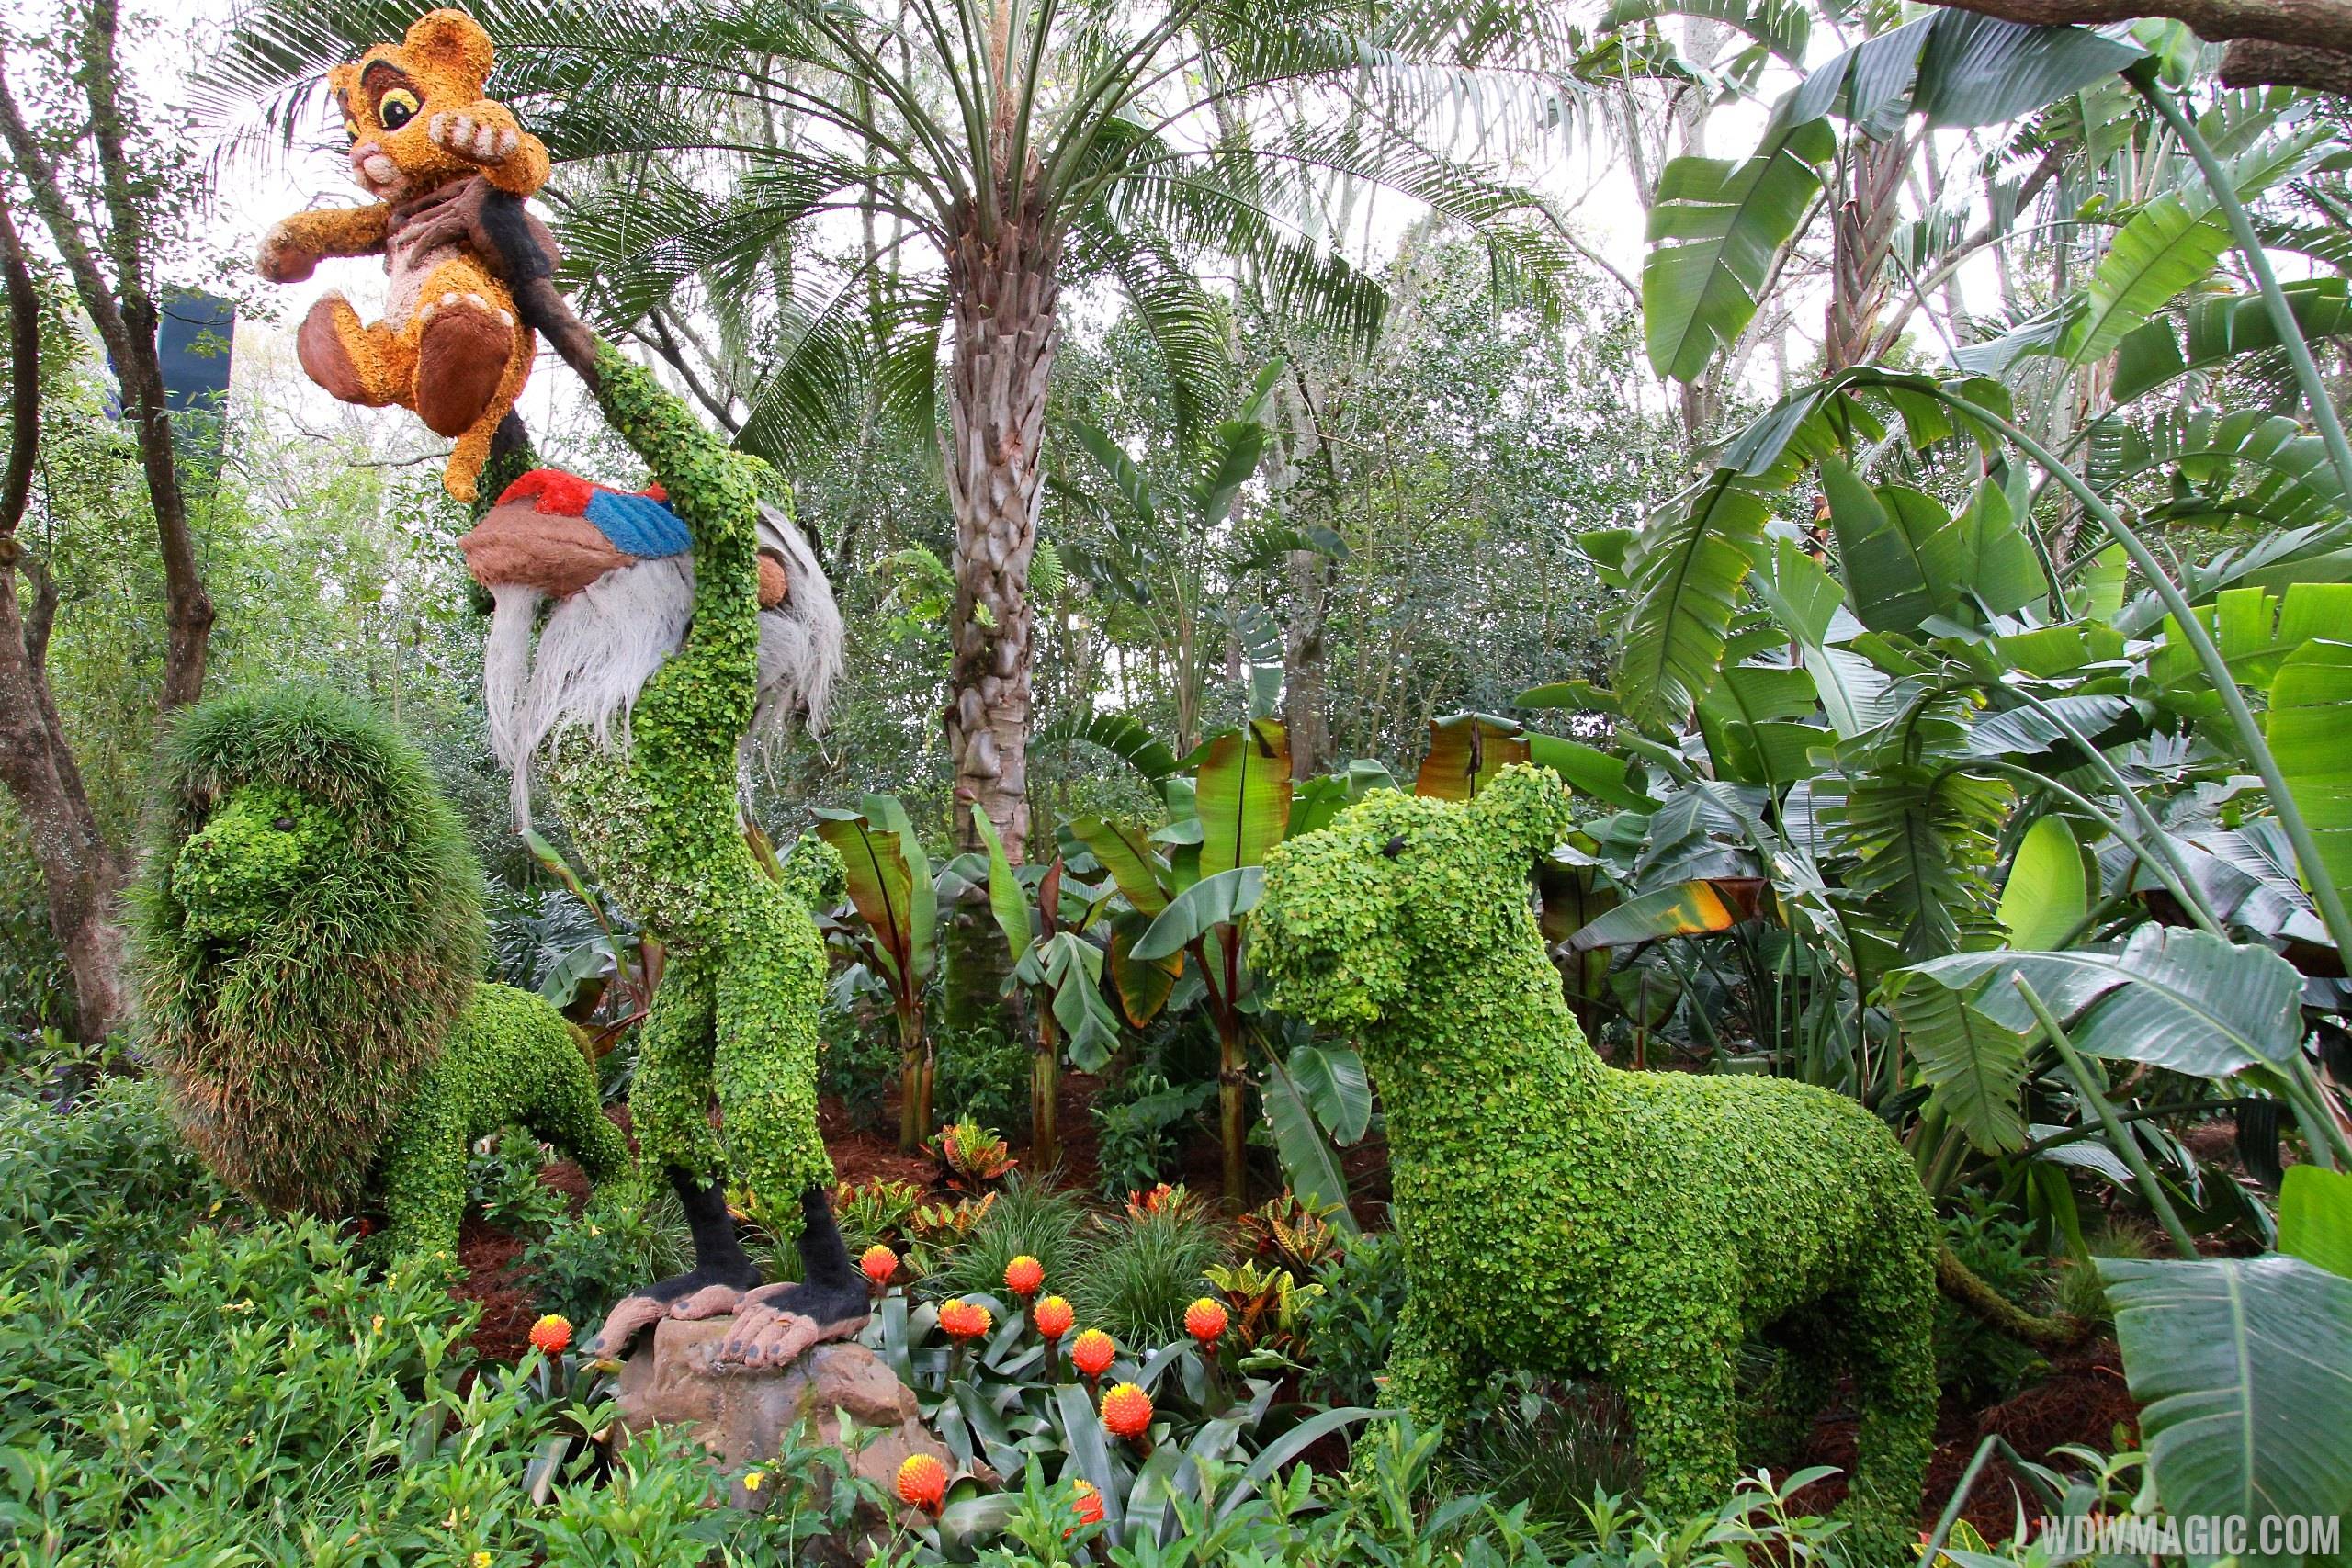 2014 Epcot Flower and Garden Festival - Lion King Rafiki and Simba topiary